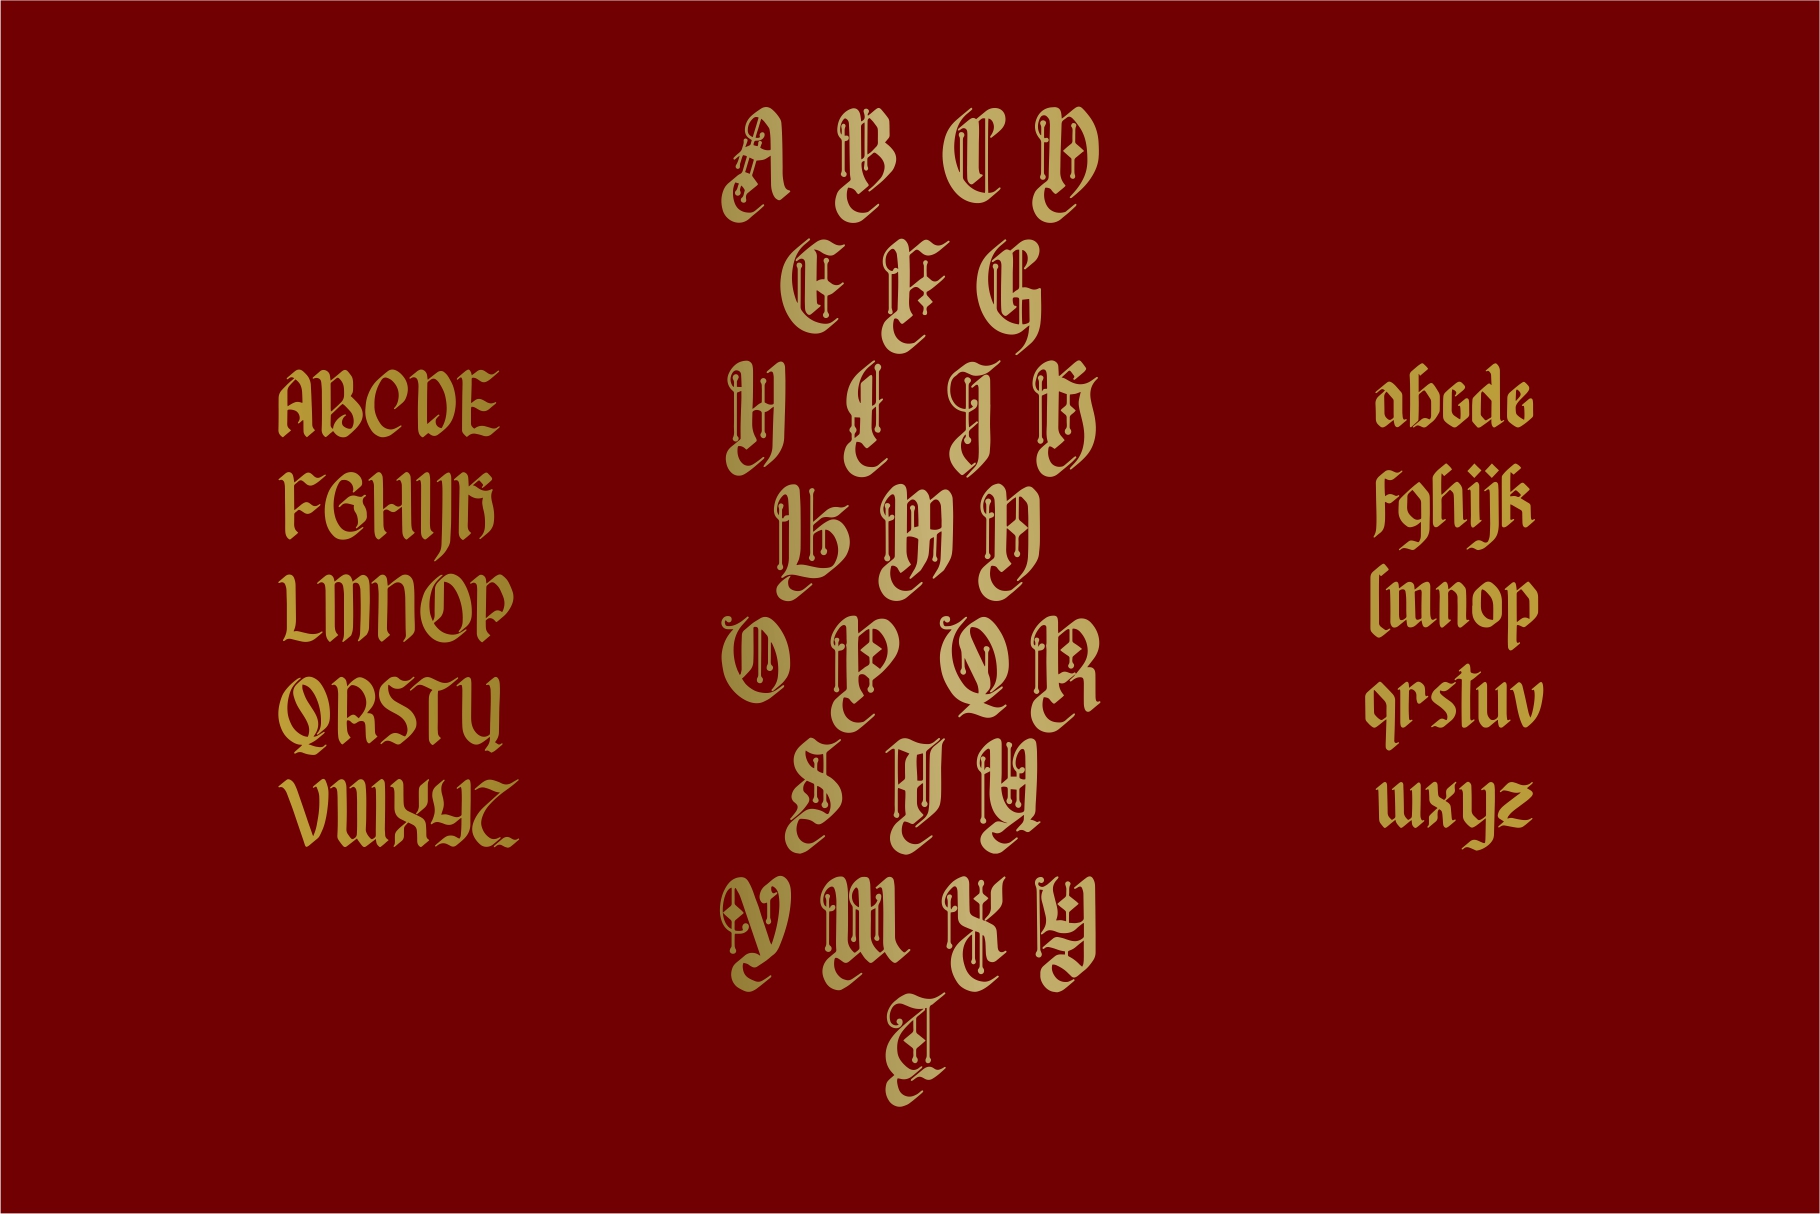 Afterkilly font